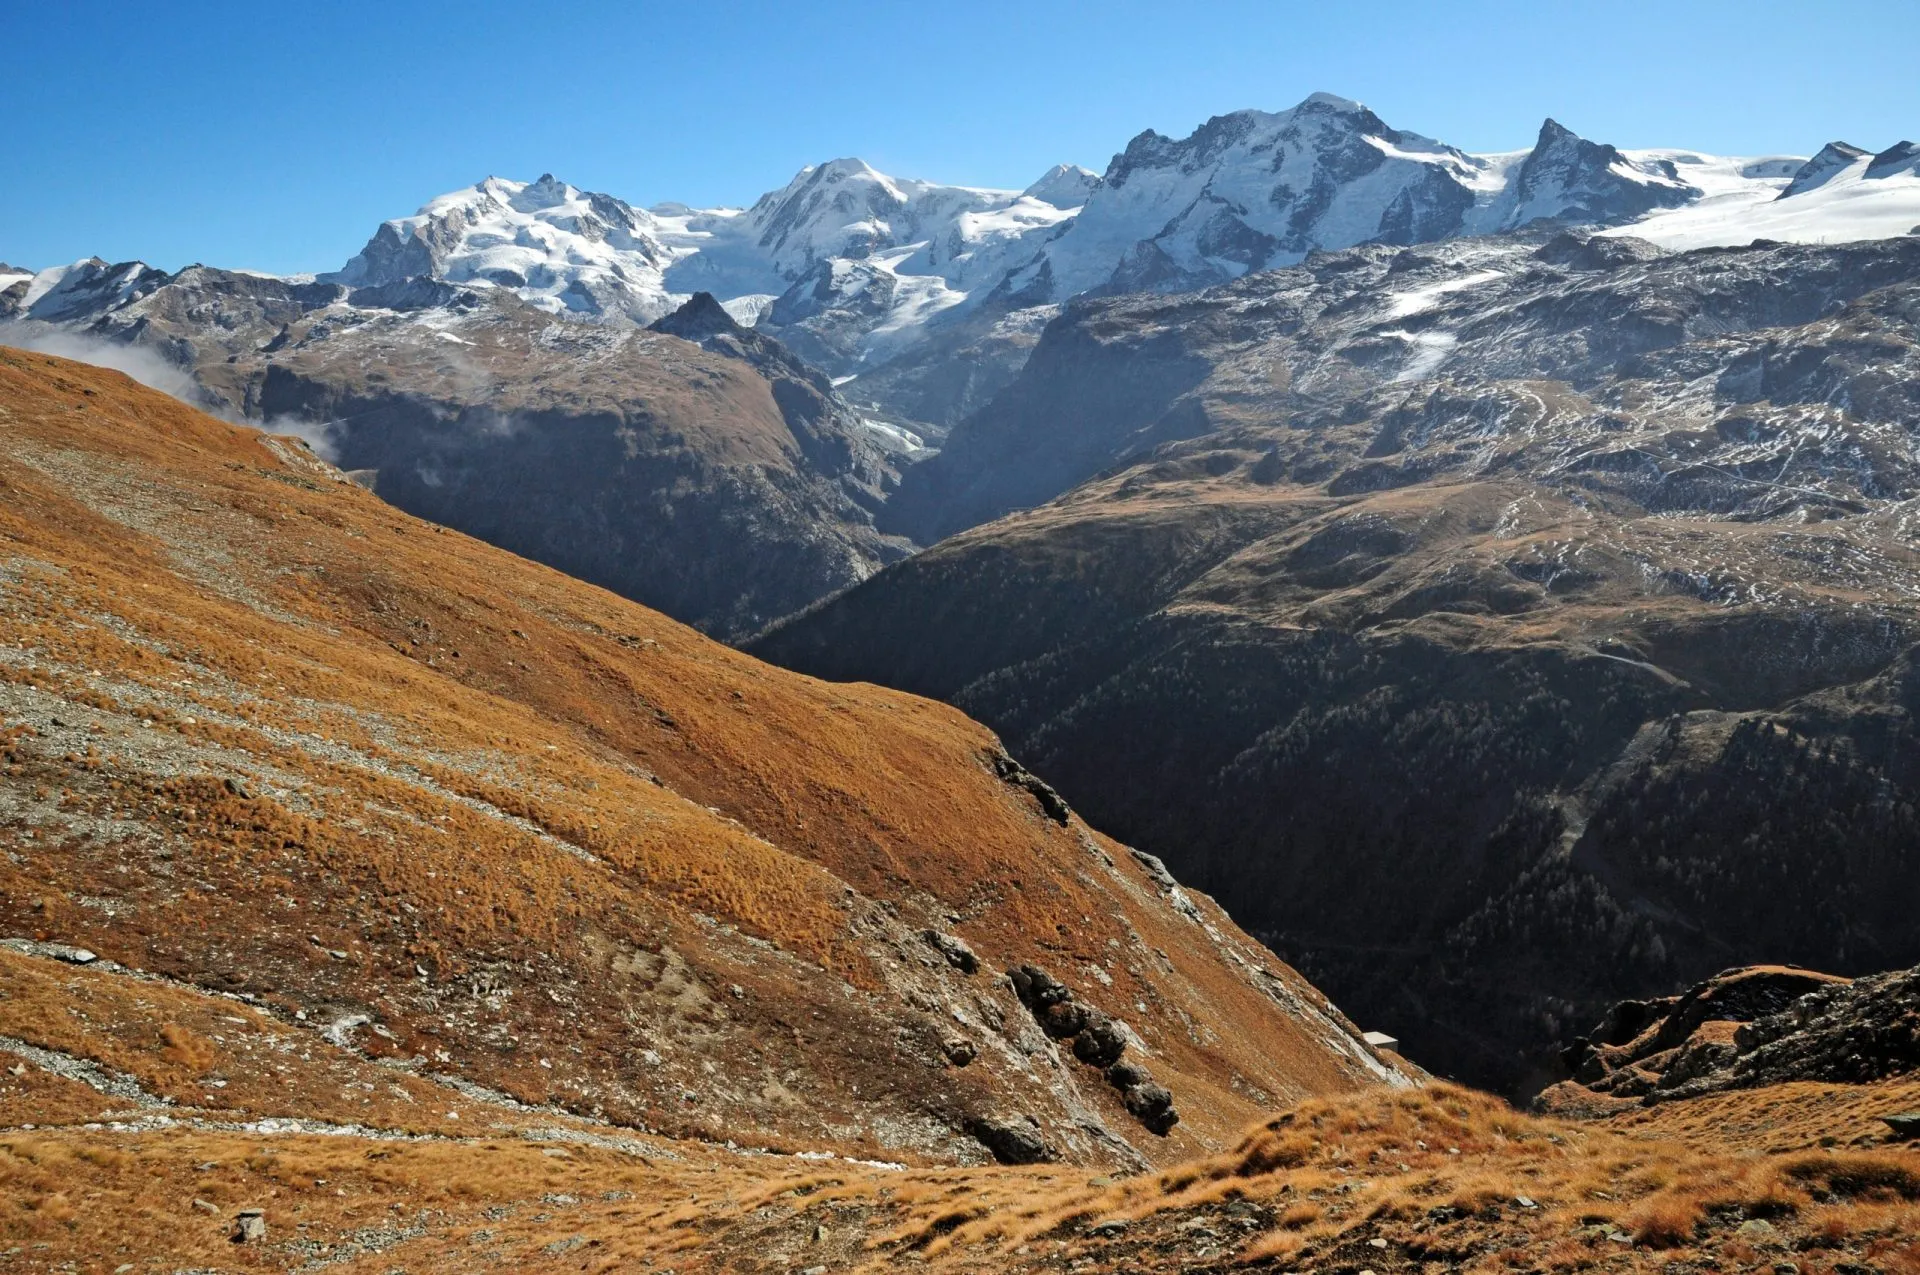 Looking back on the monte rosa massif